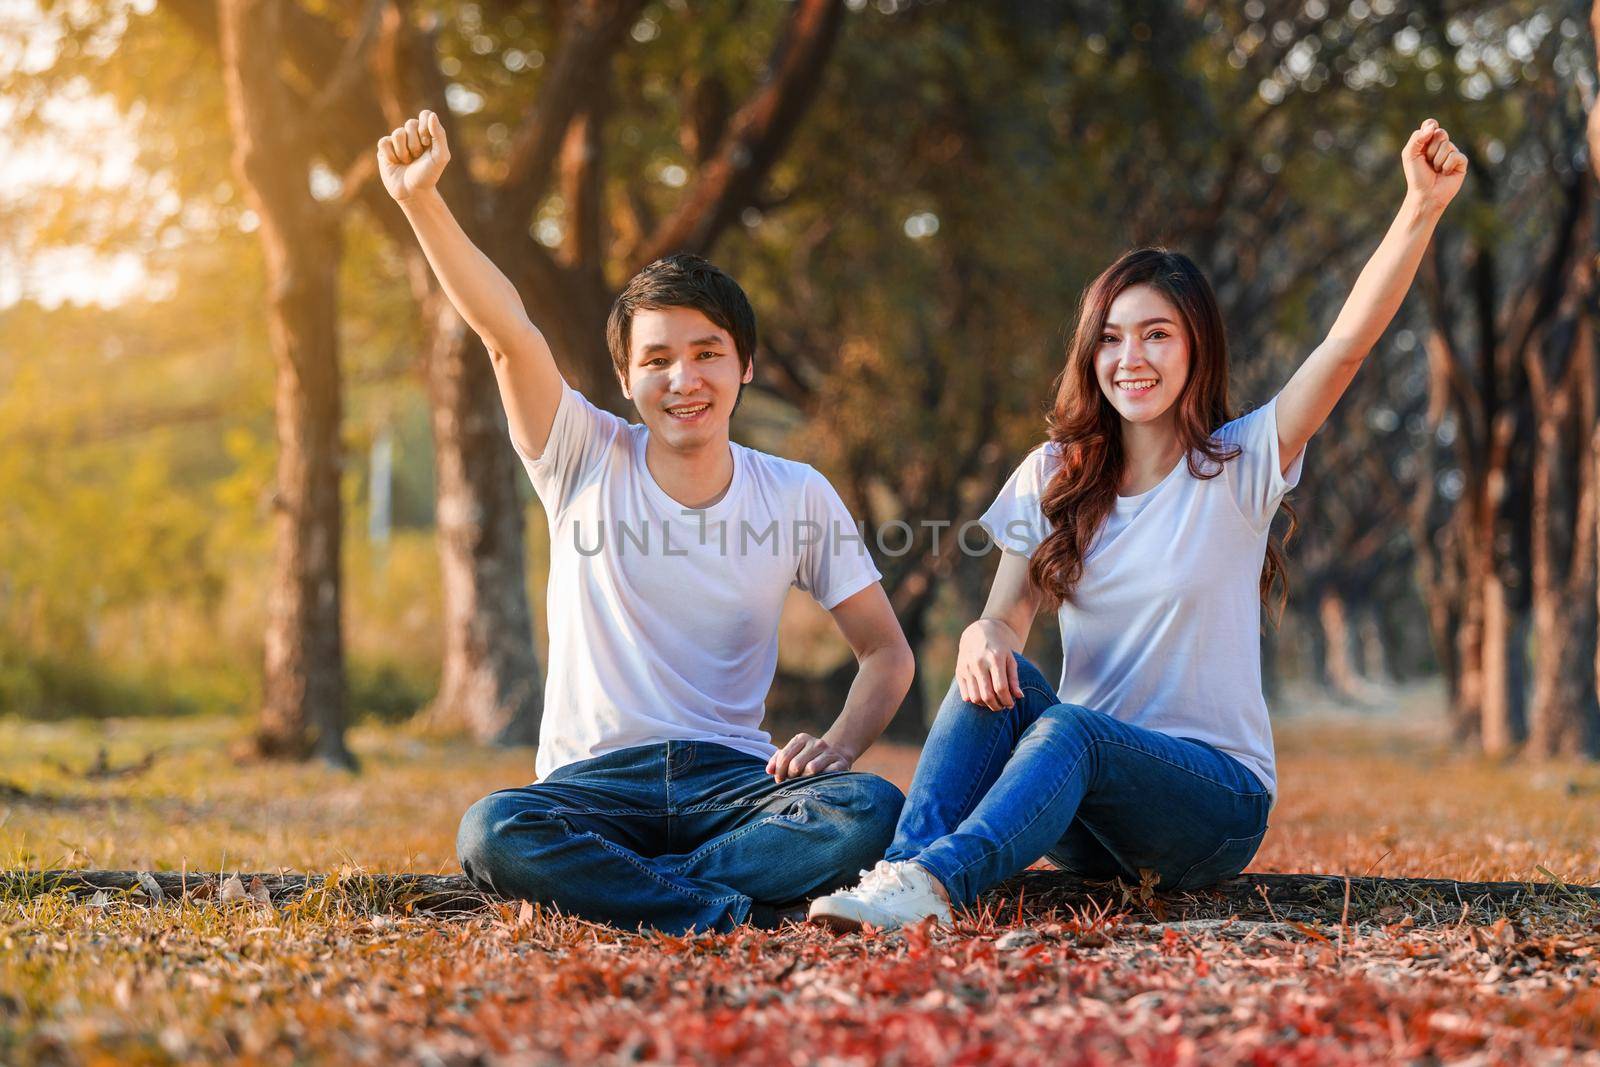 happy young couple with arm raised in the park 